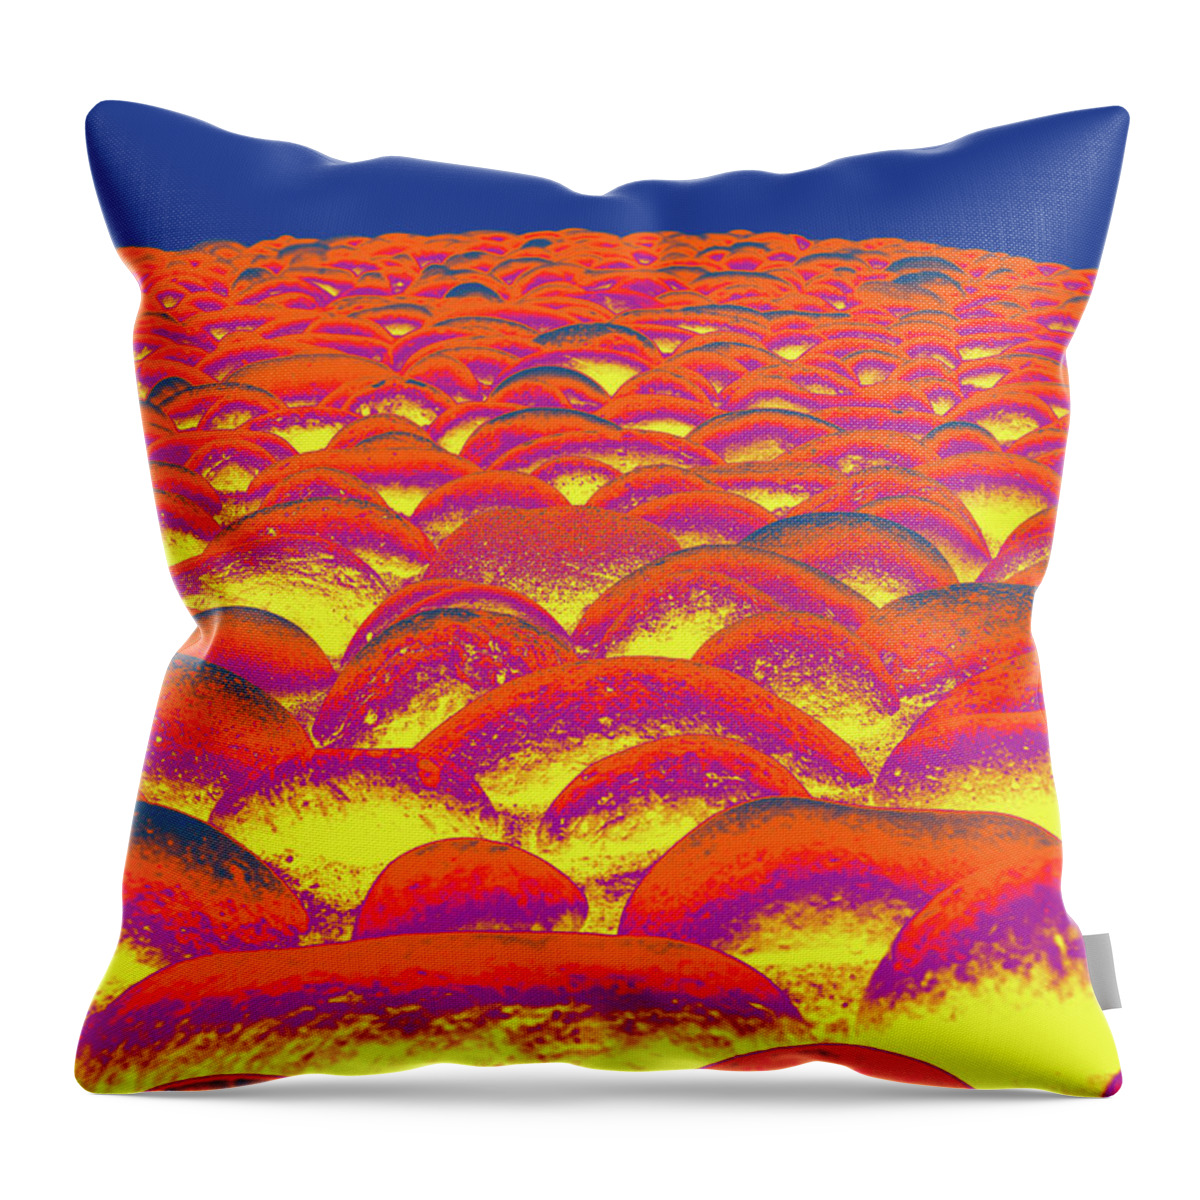 Abstract Throw Pillow featuring the digital art Close Up To A Rock Wall, Yellow, Red, Orange, And Purple by David Desautel